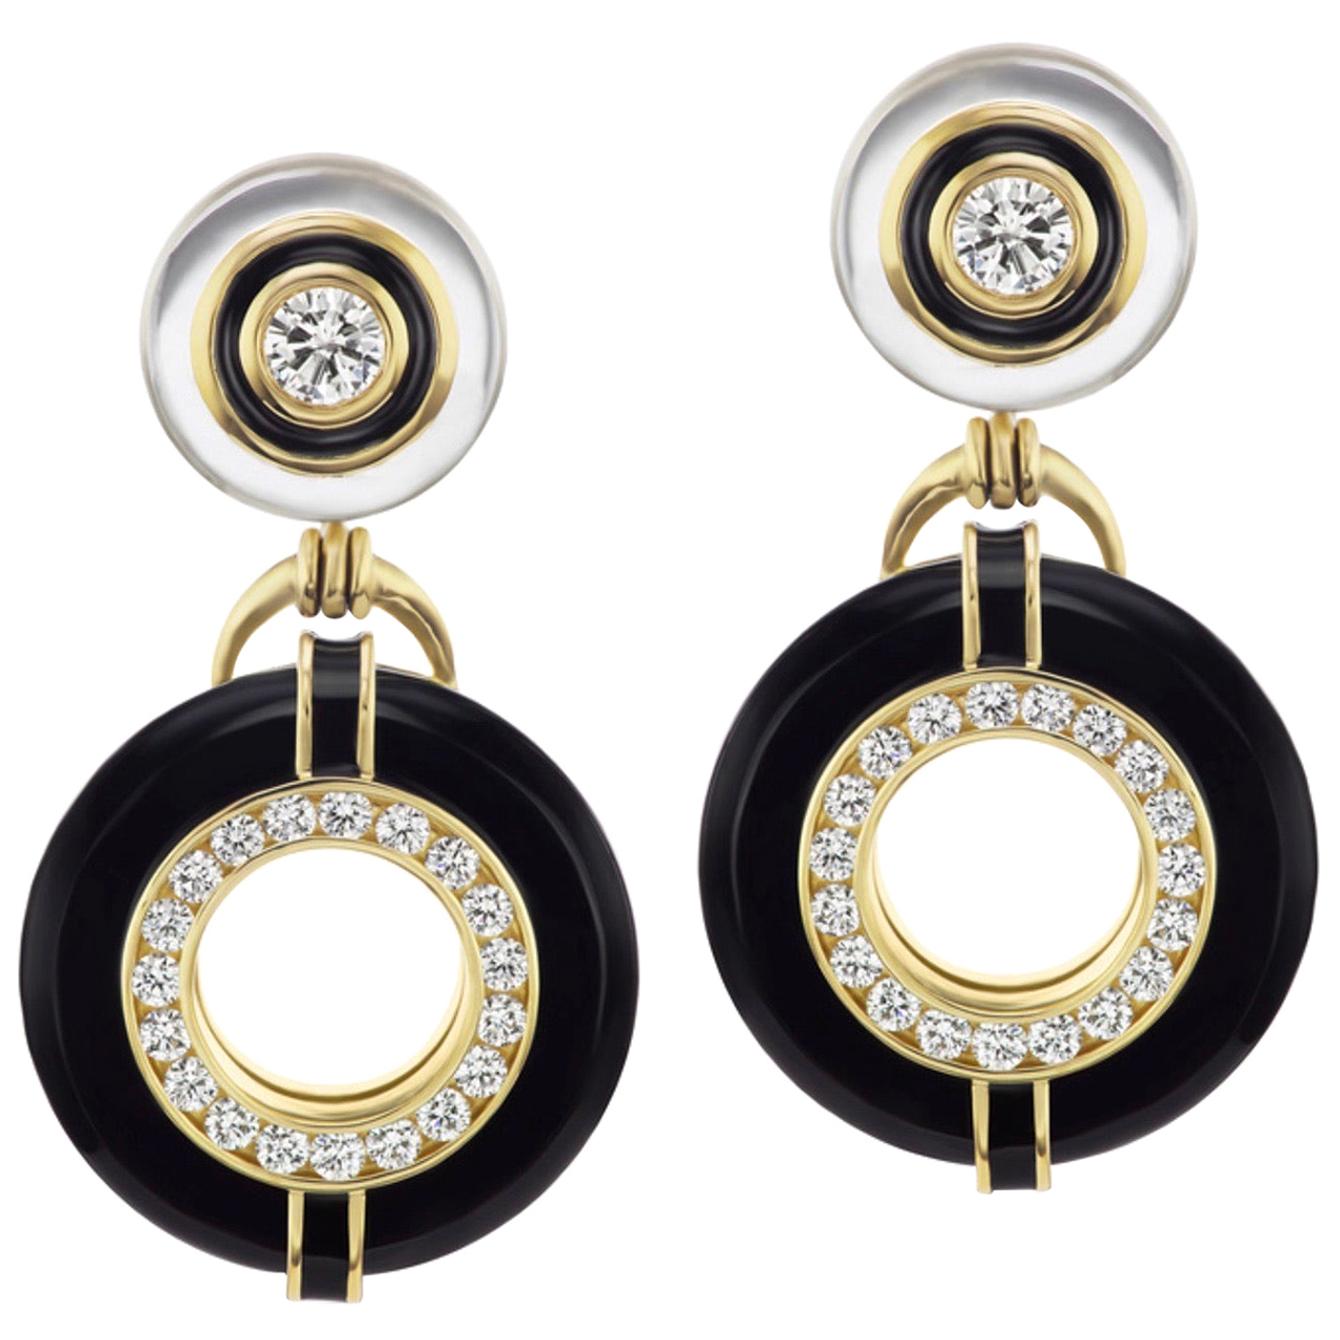 Diamond, Onyx, and Rock Crystal Earrings with Black Enamel in 18 Yellow Gold